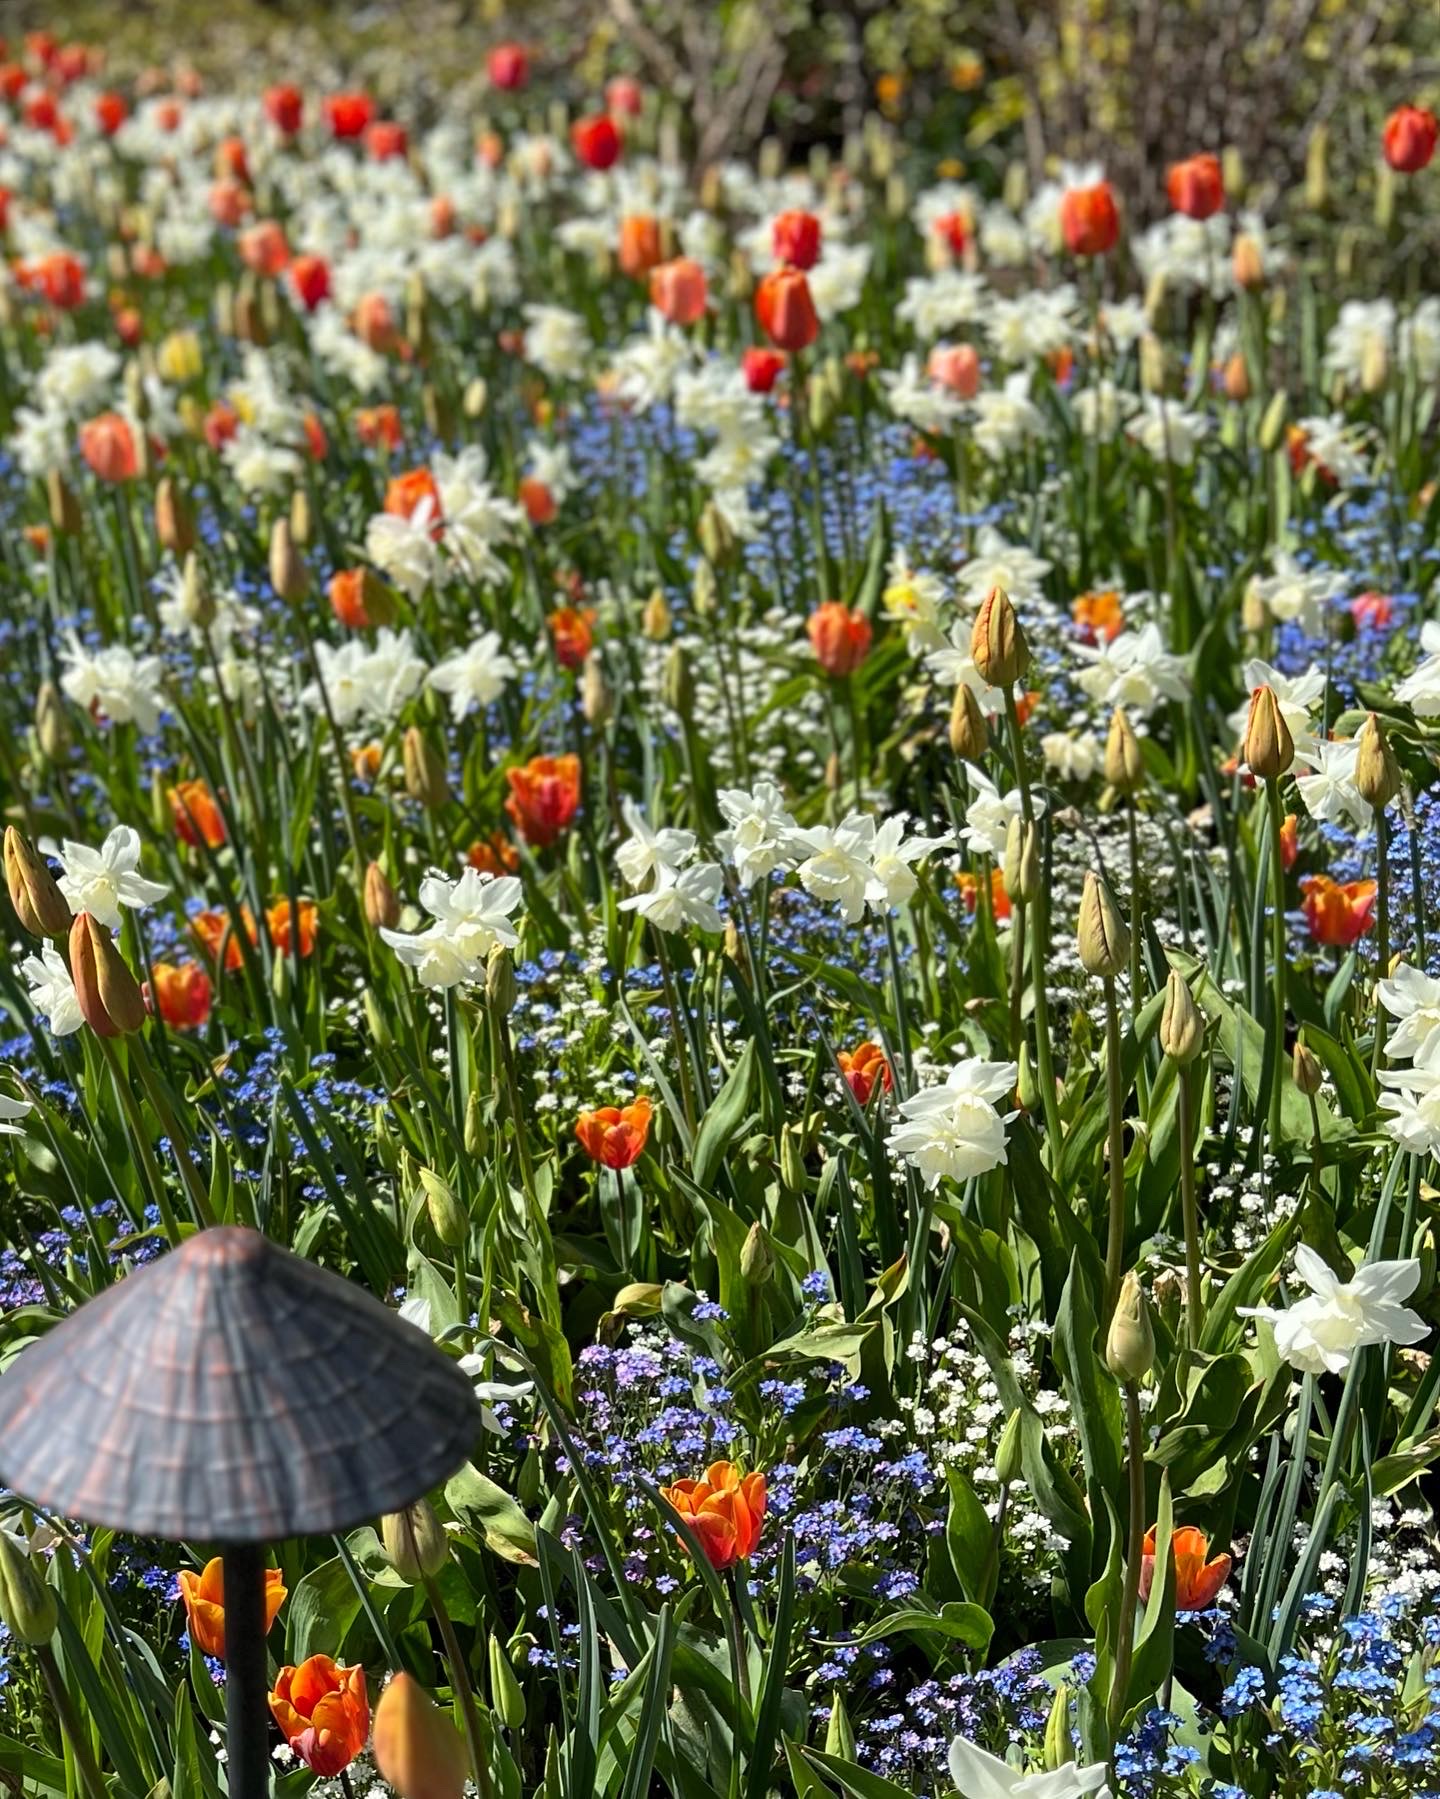 large mixed planting of white daffodils orange tulips and blue forget-me-nots